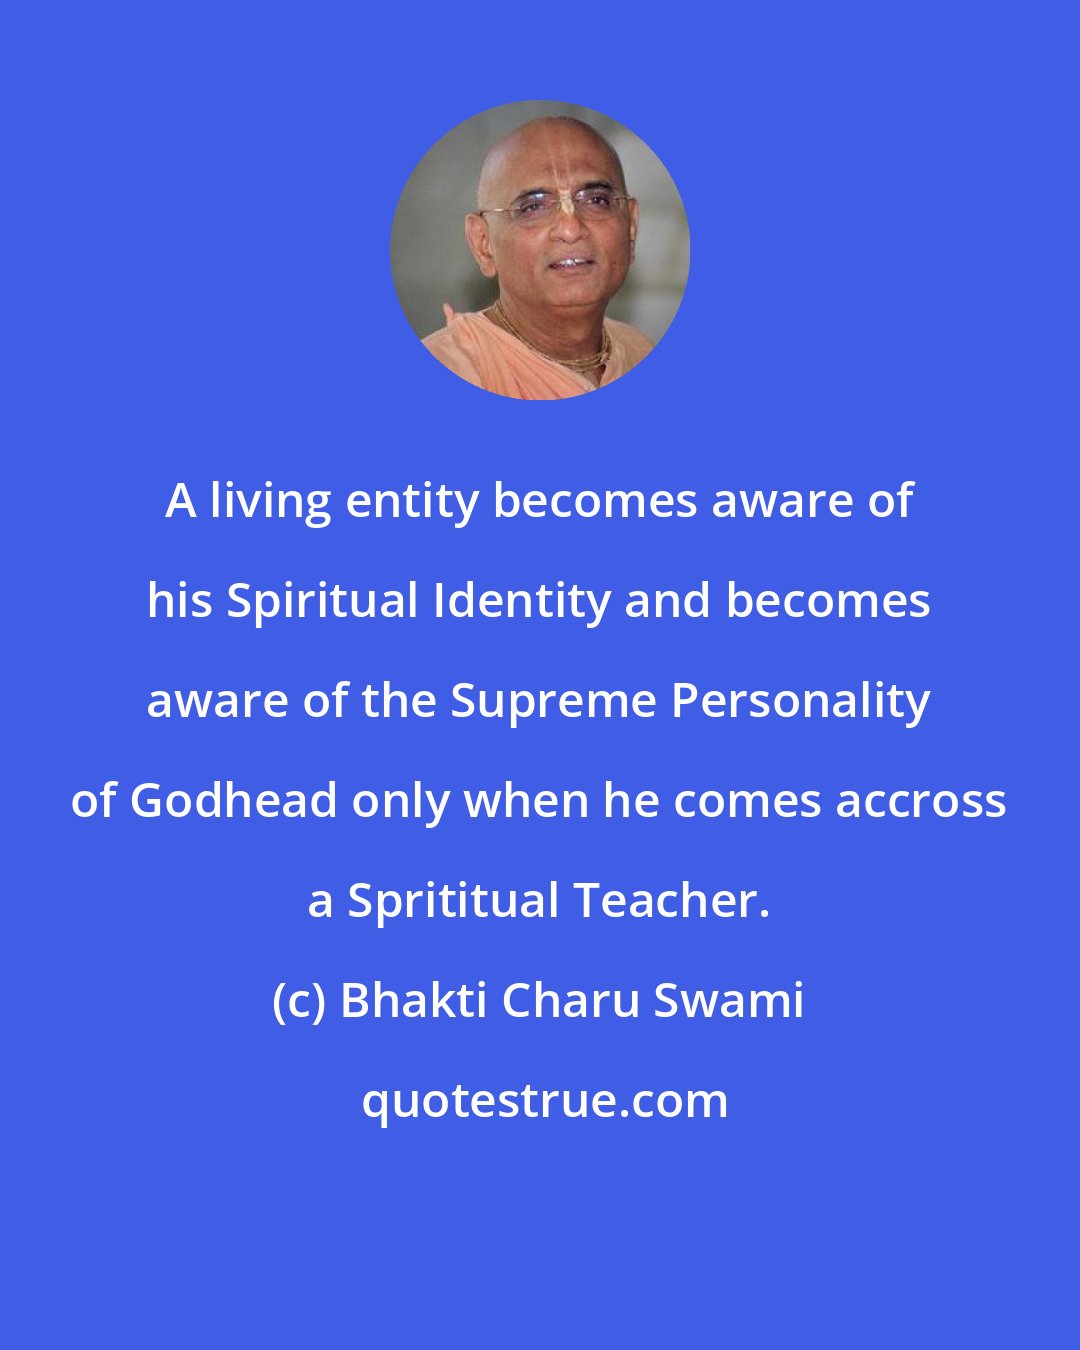 Bhakti Charu Swami: A living entity becomes aware of his Spiritual Identity and becomes aware of the Supreme Personality of Godhead only when he comes accross a Sprititual Teacher.